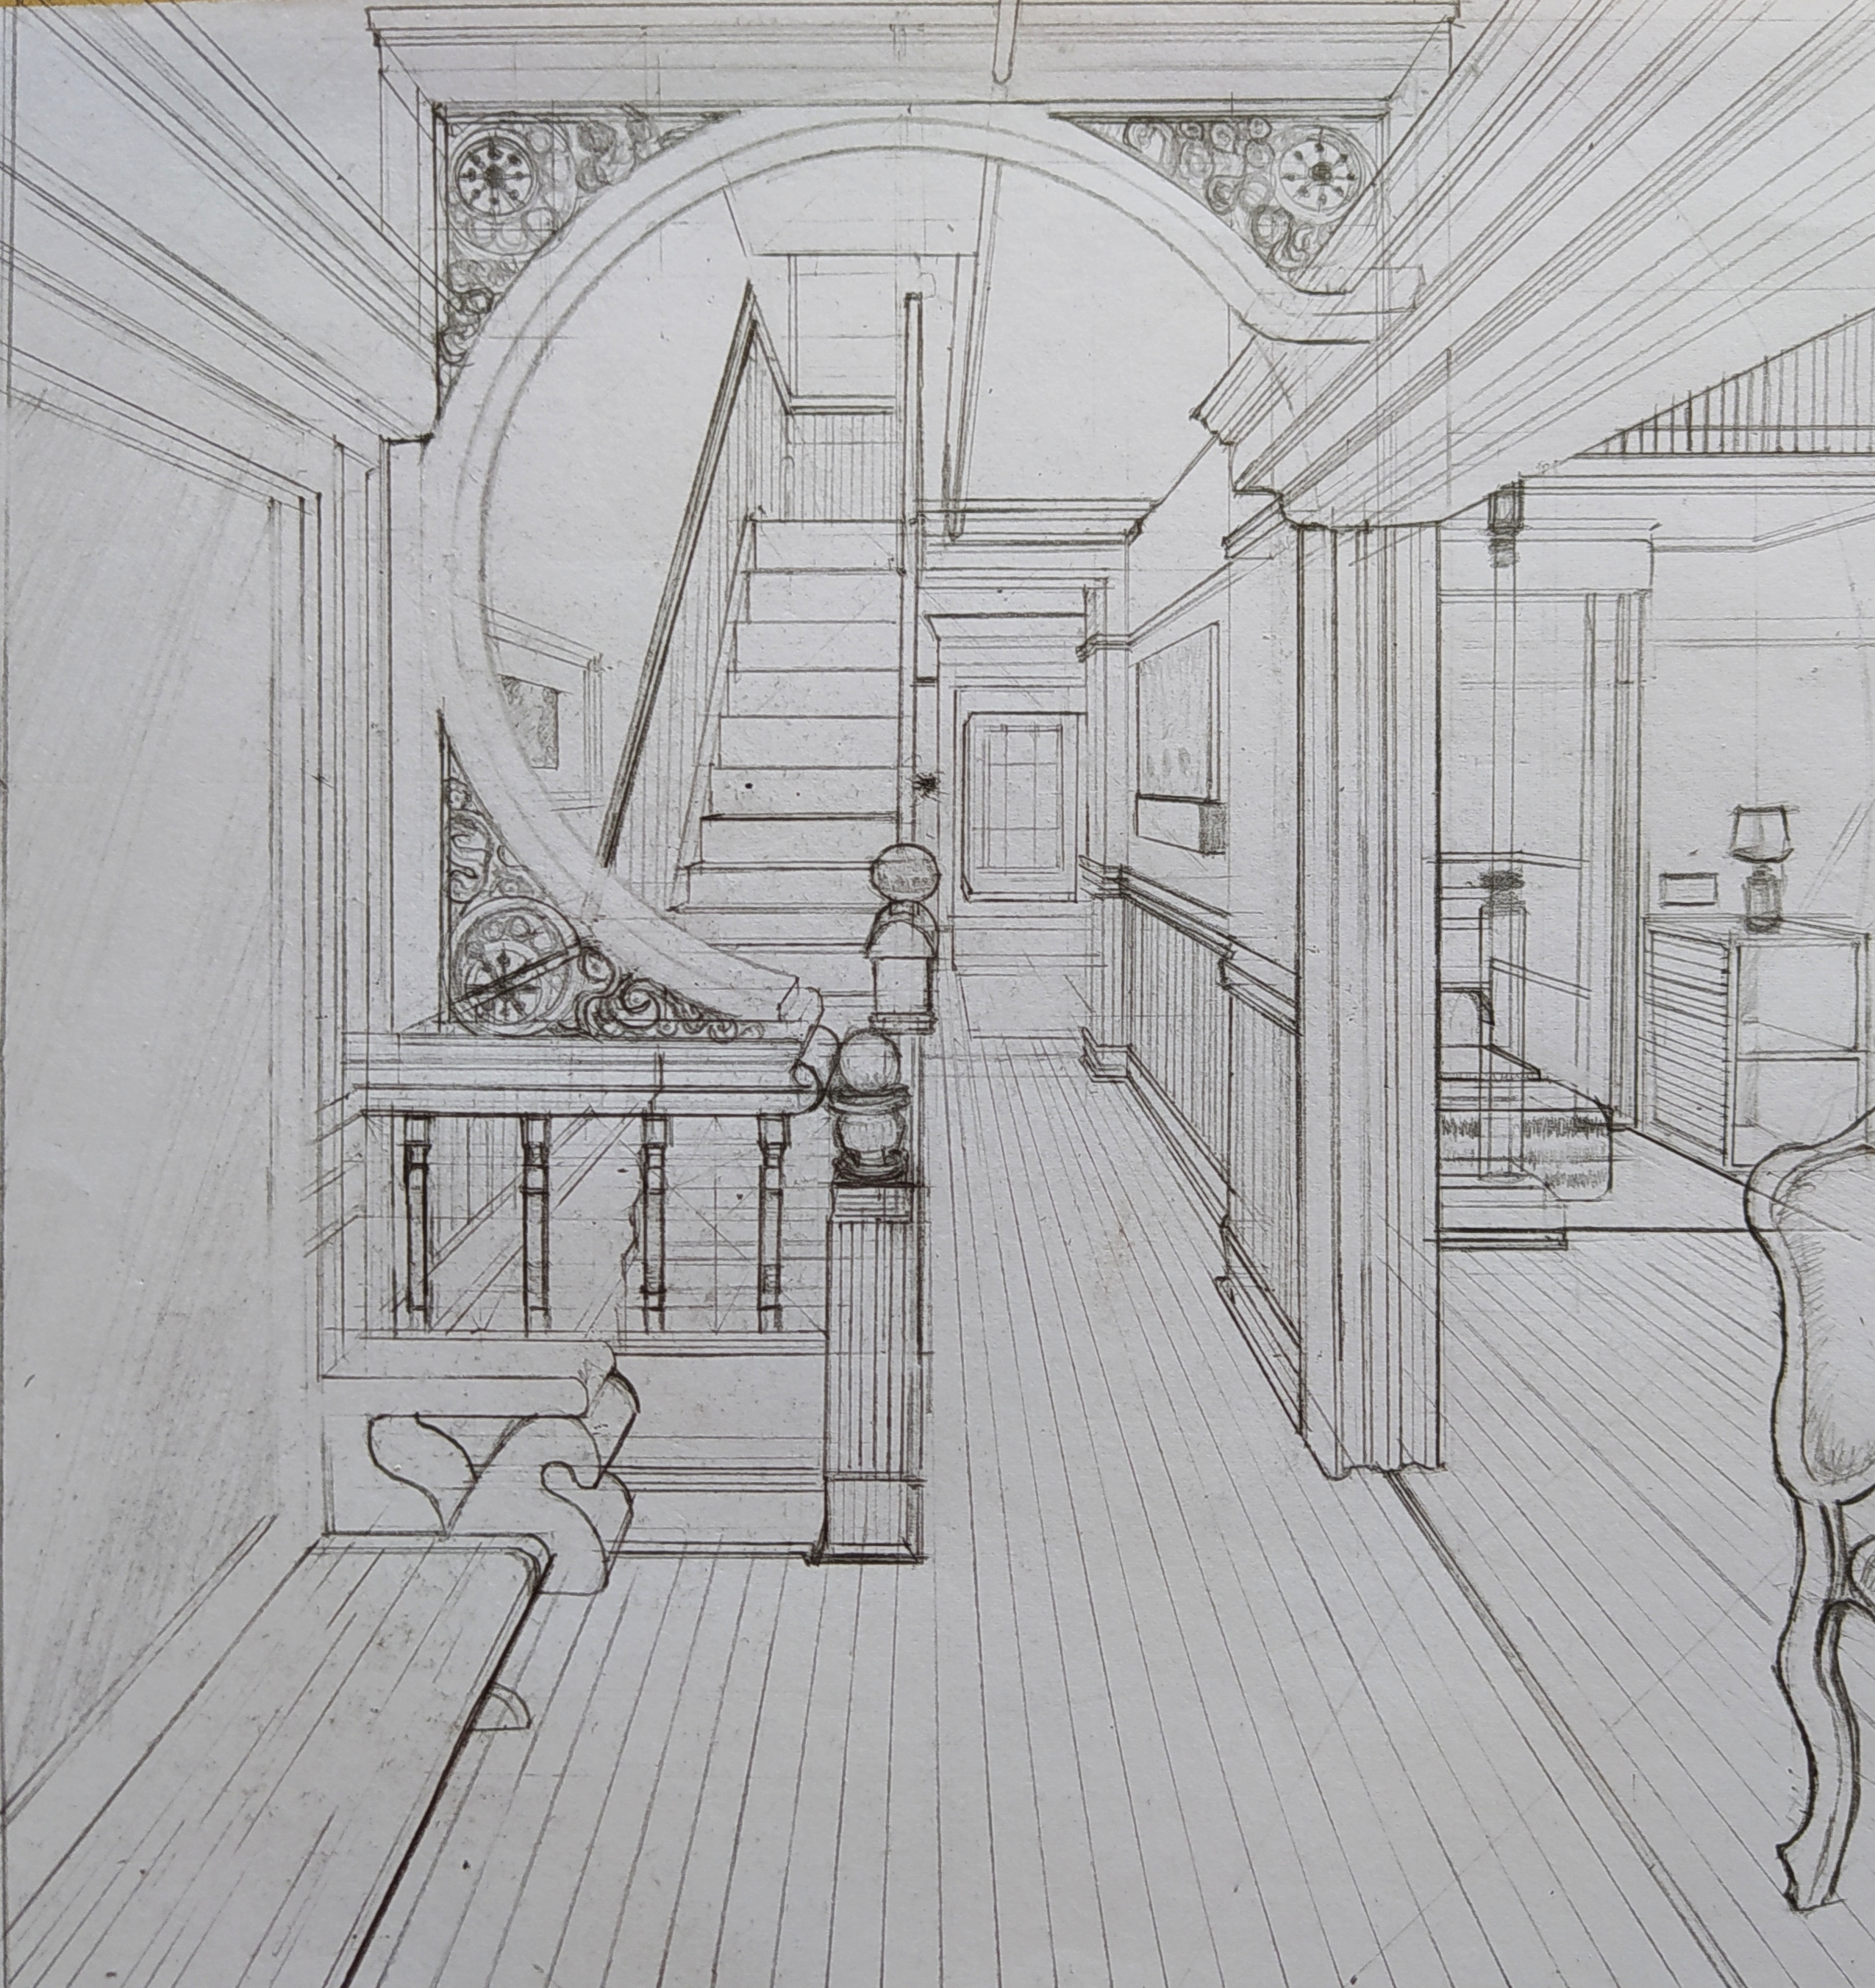 interior Perspective Drawing by TylerKoh on DeviantArt